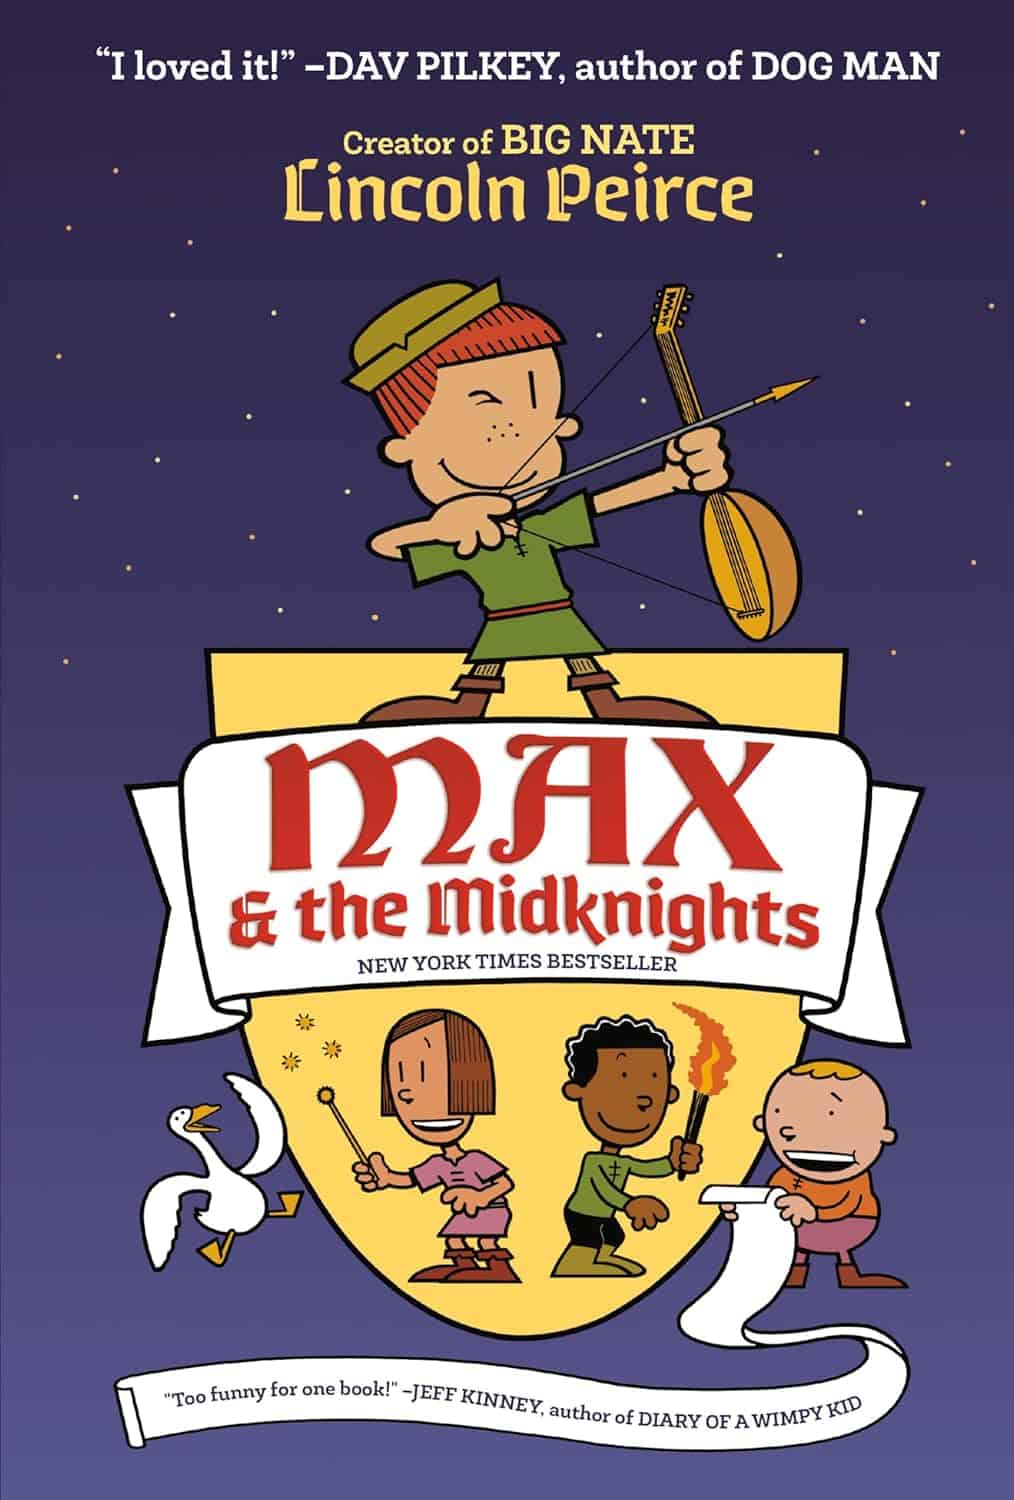 Max and her Quest to Become a Knight